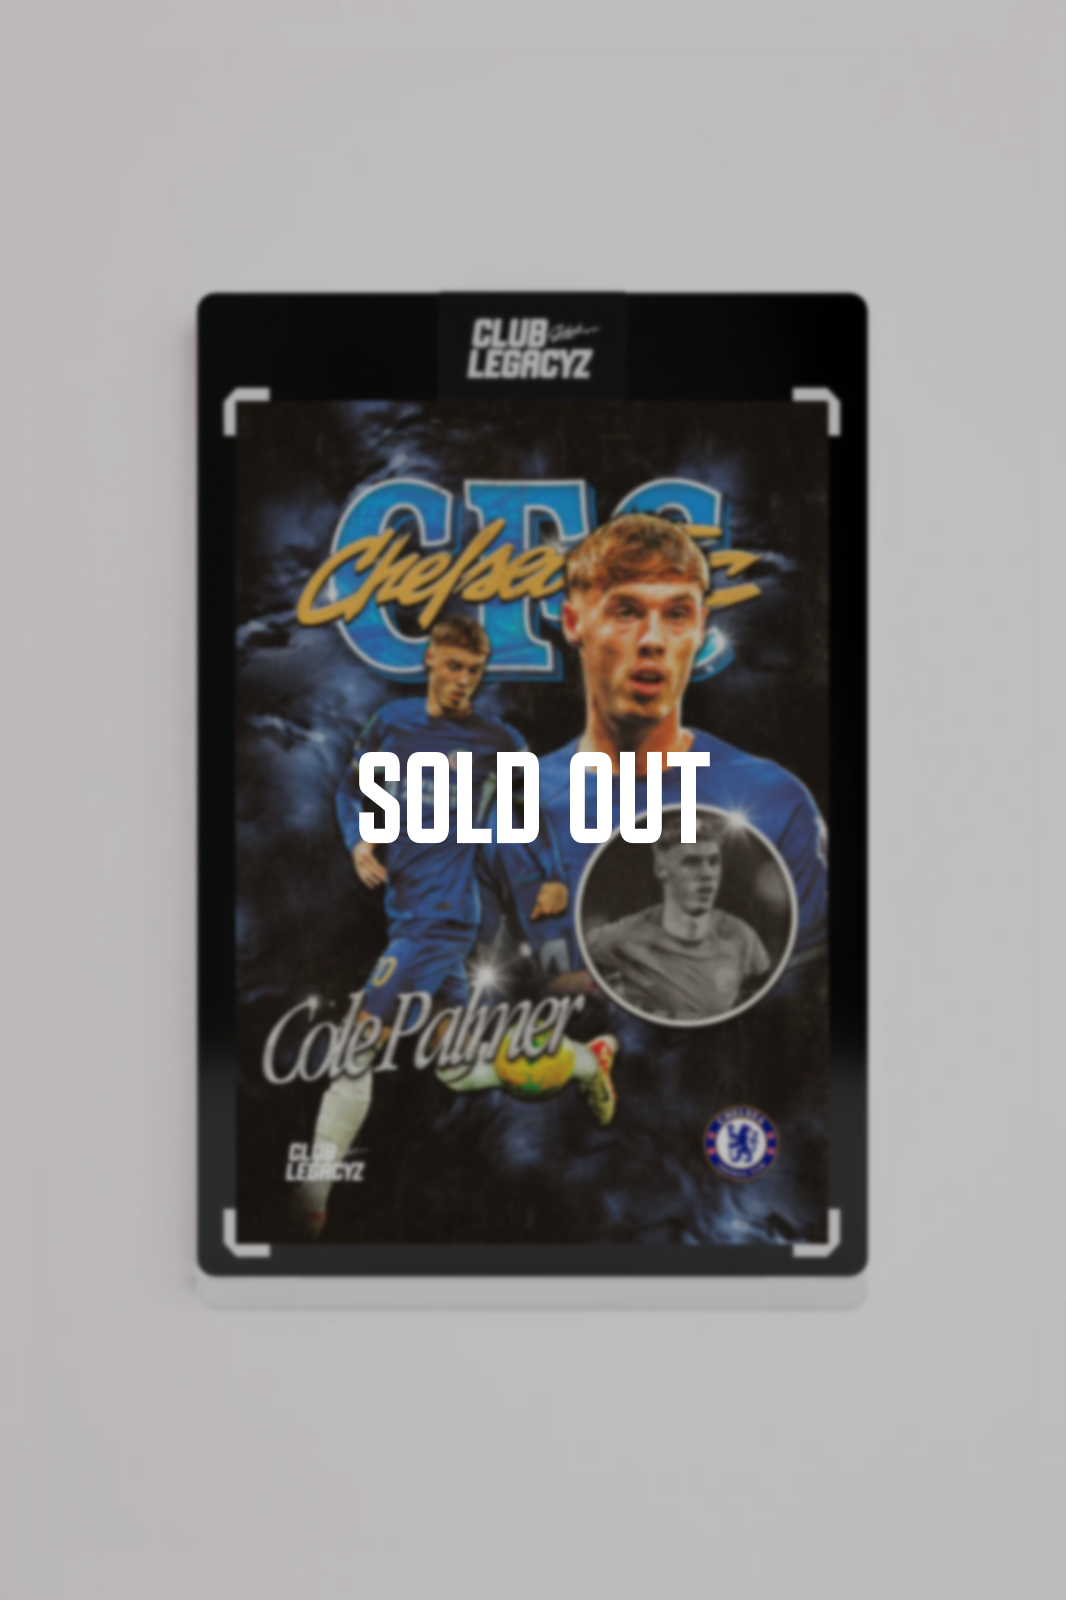 Chelsea FC - Cole Palmer Bootleg 3D Icon limited to 10